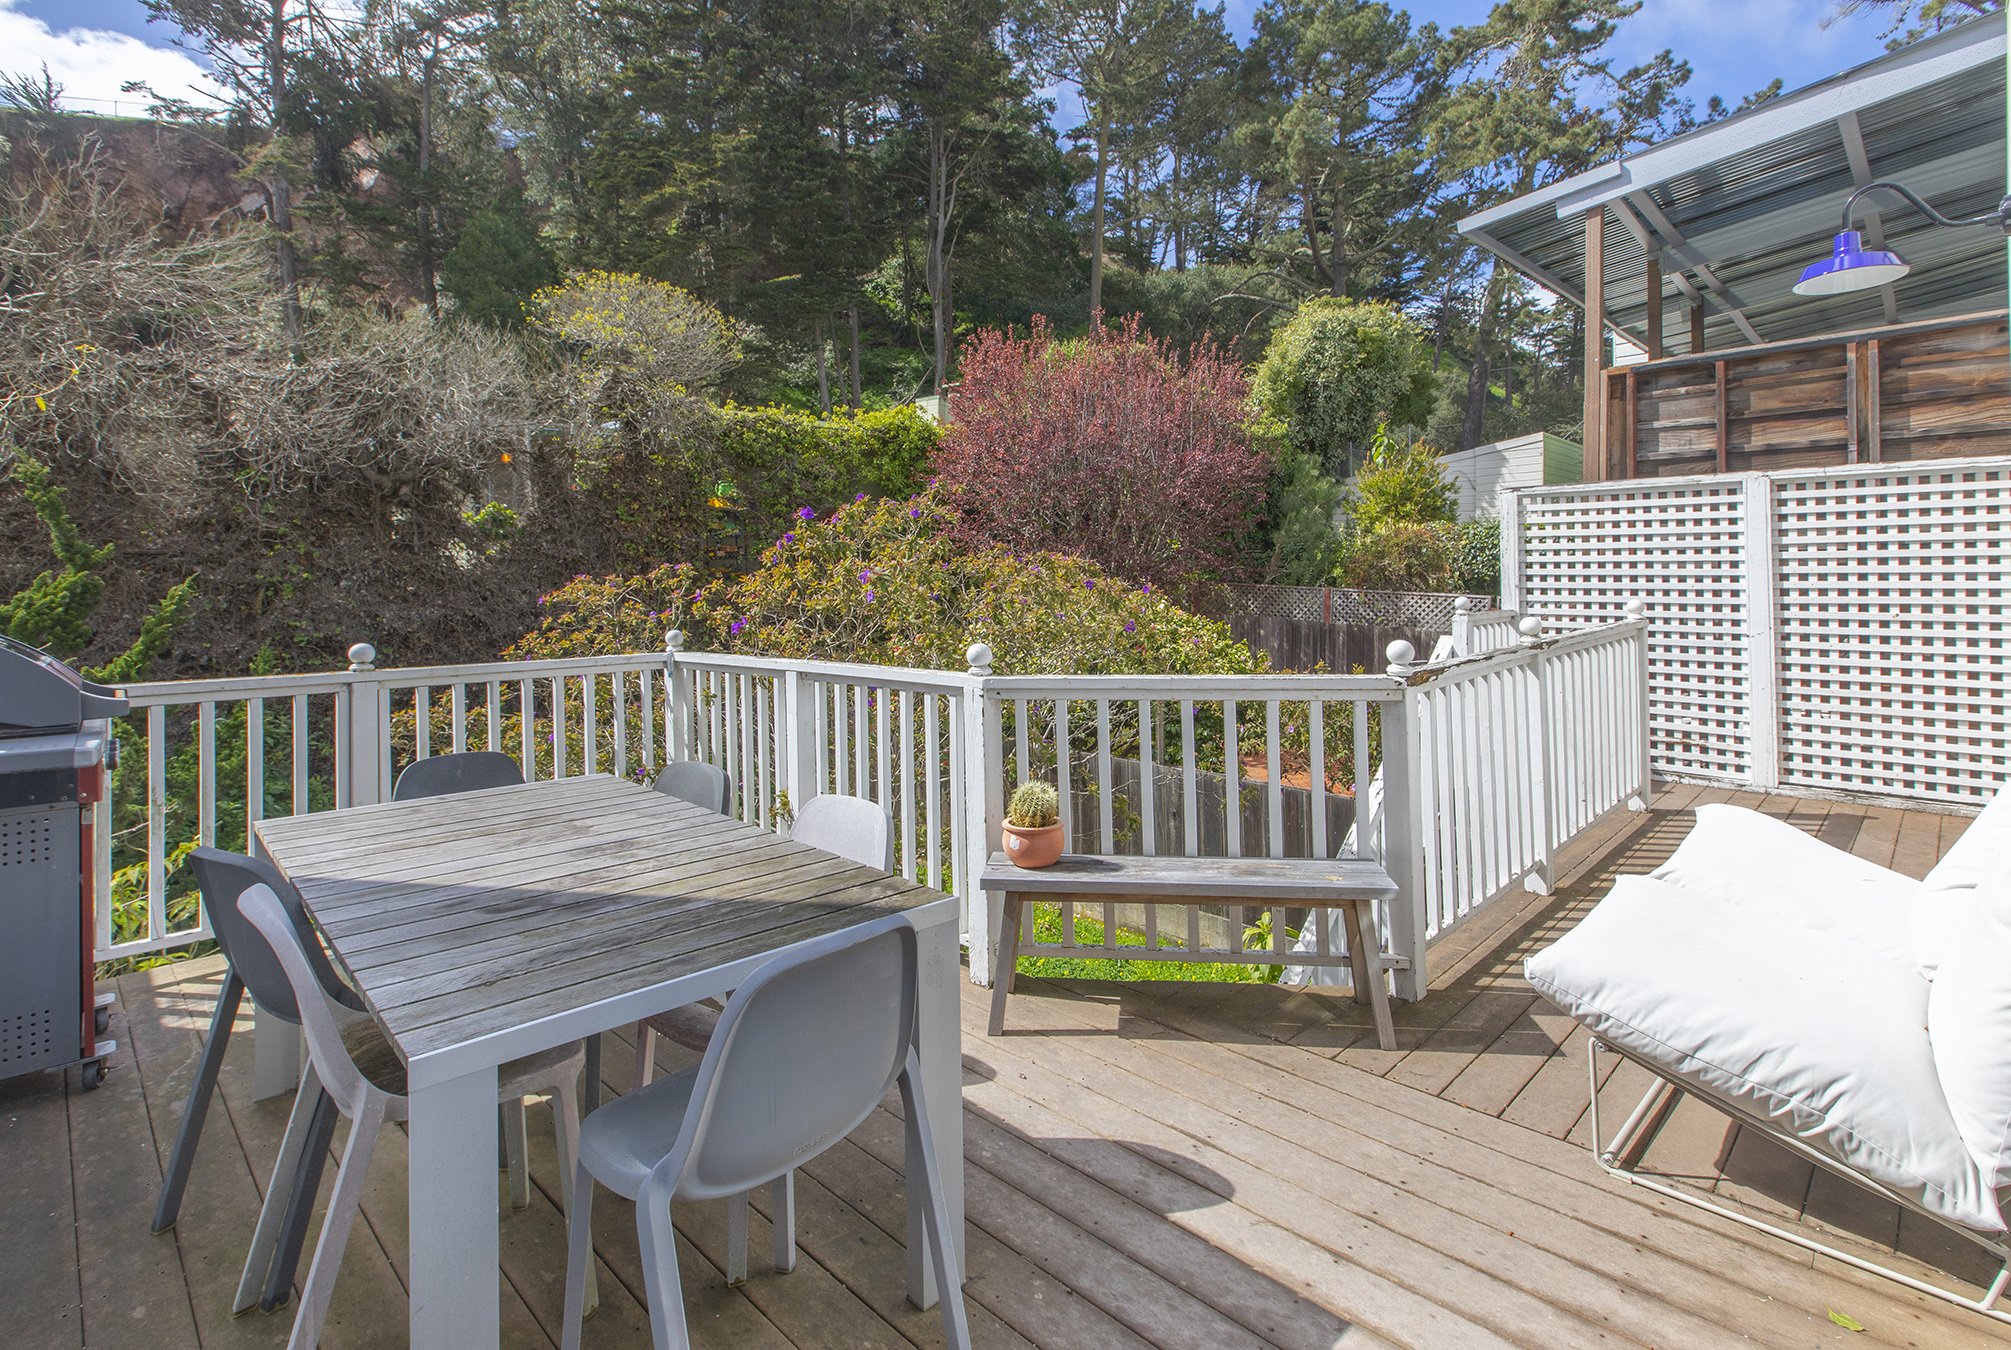 View of a private deck and yard with an outdoor living area